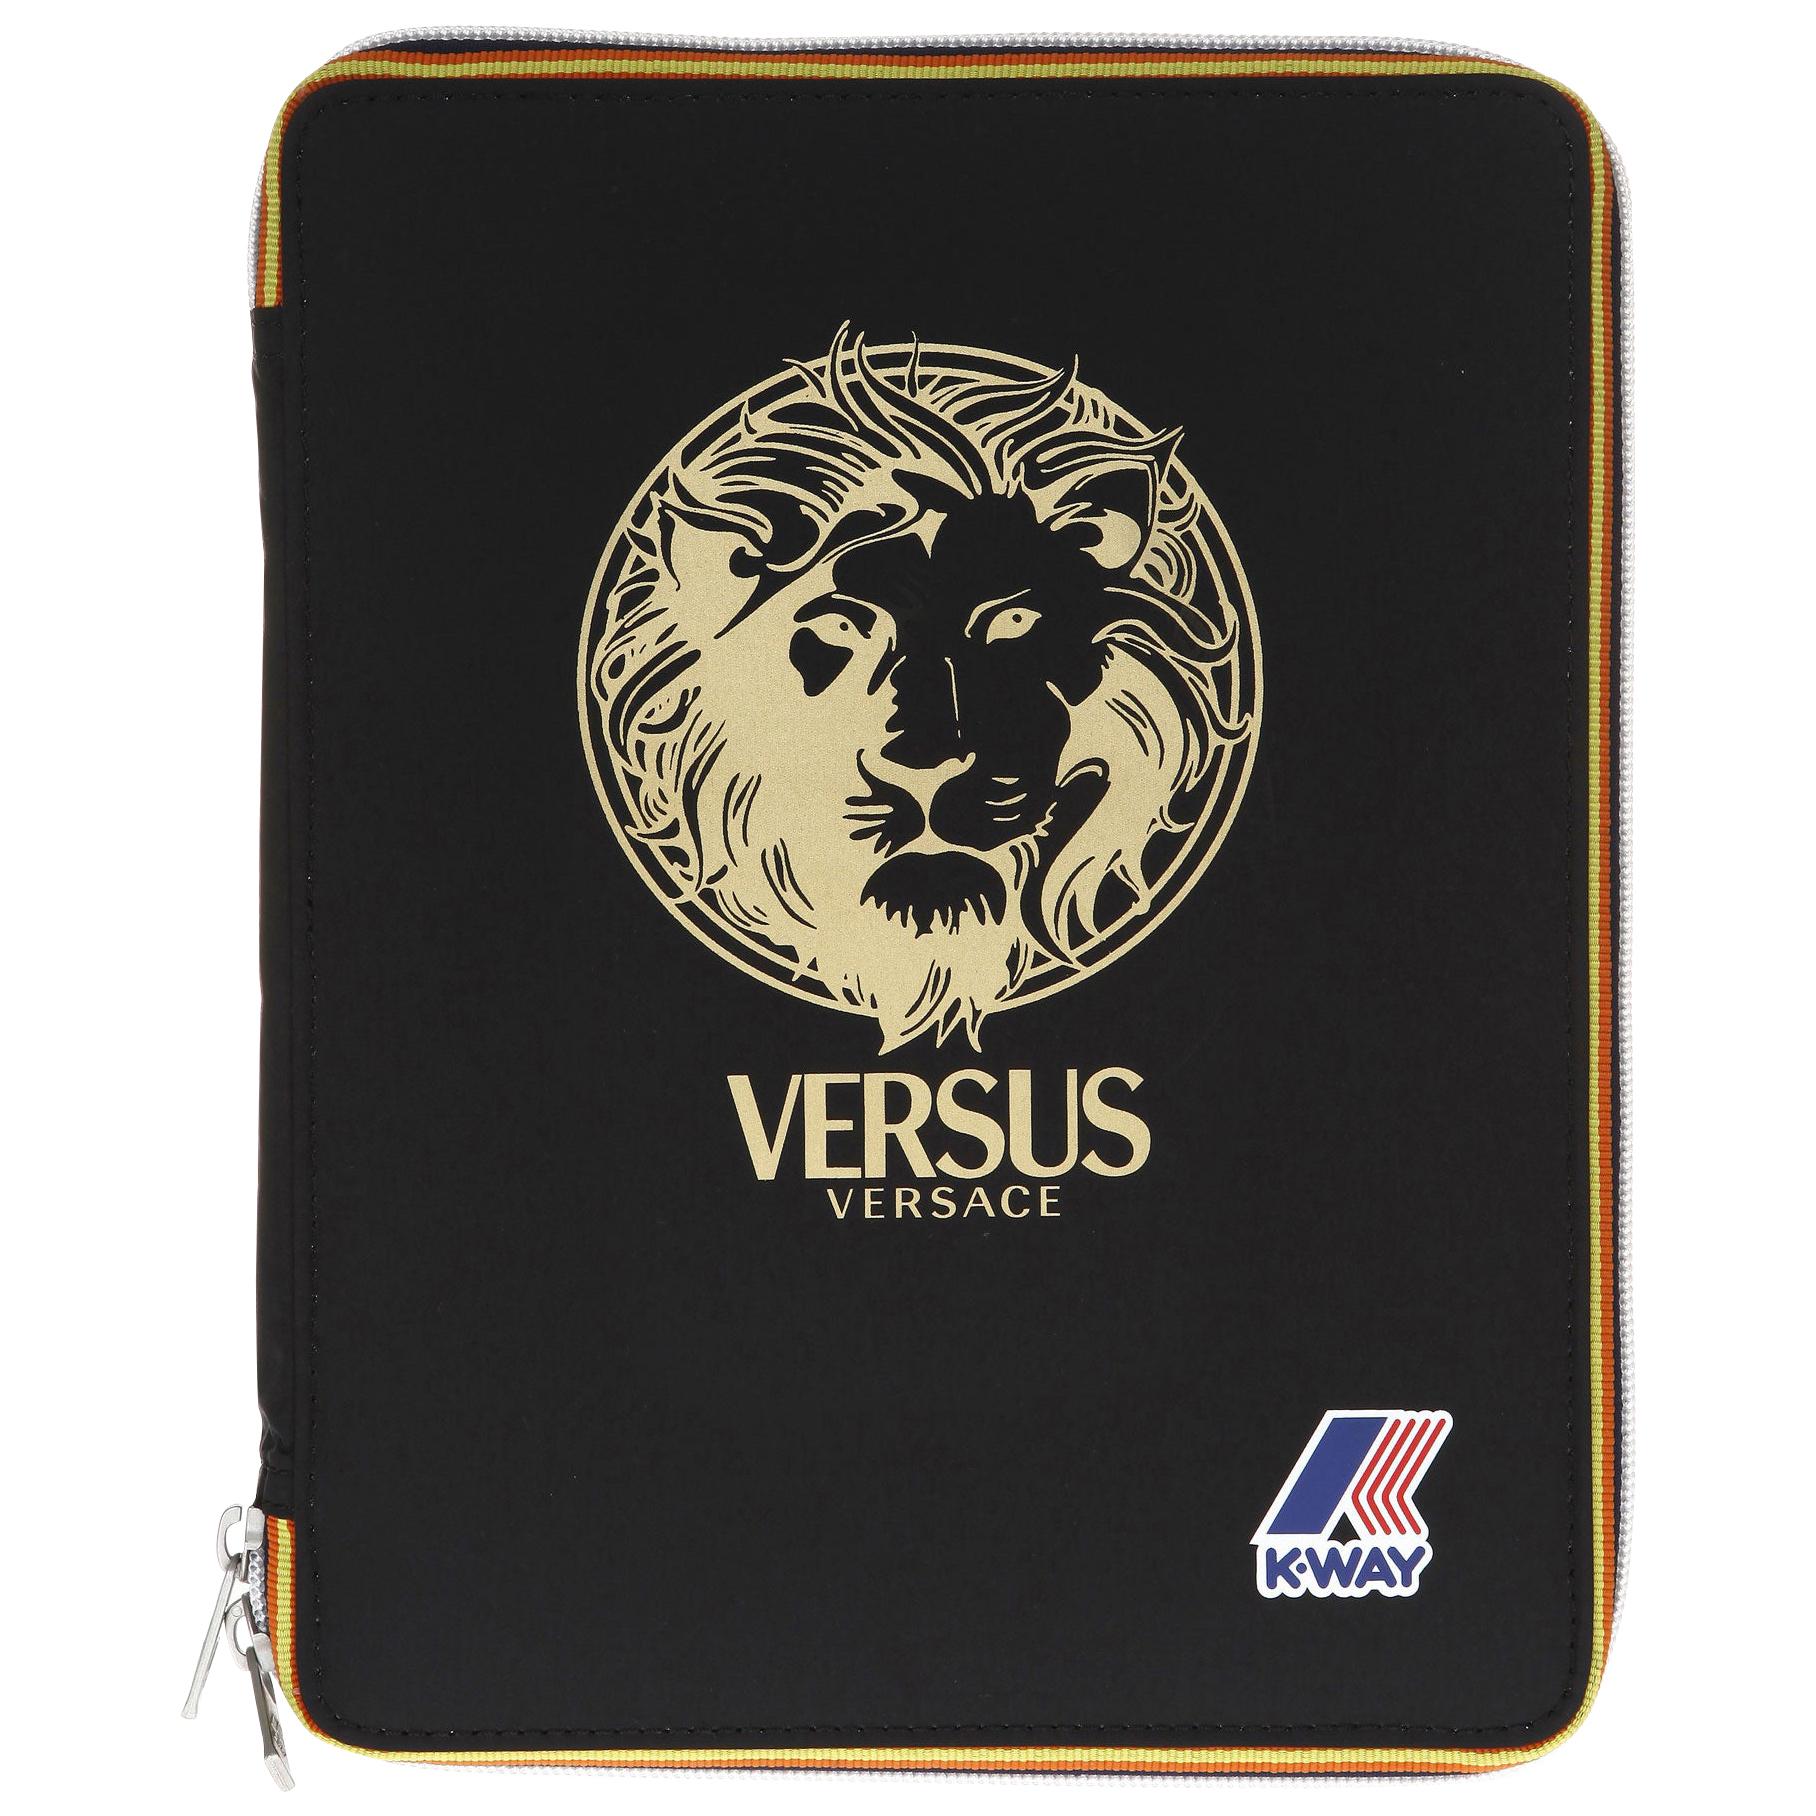 New The K-Way x Versus Versace iPad cover case For Sale